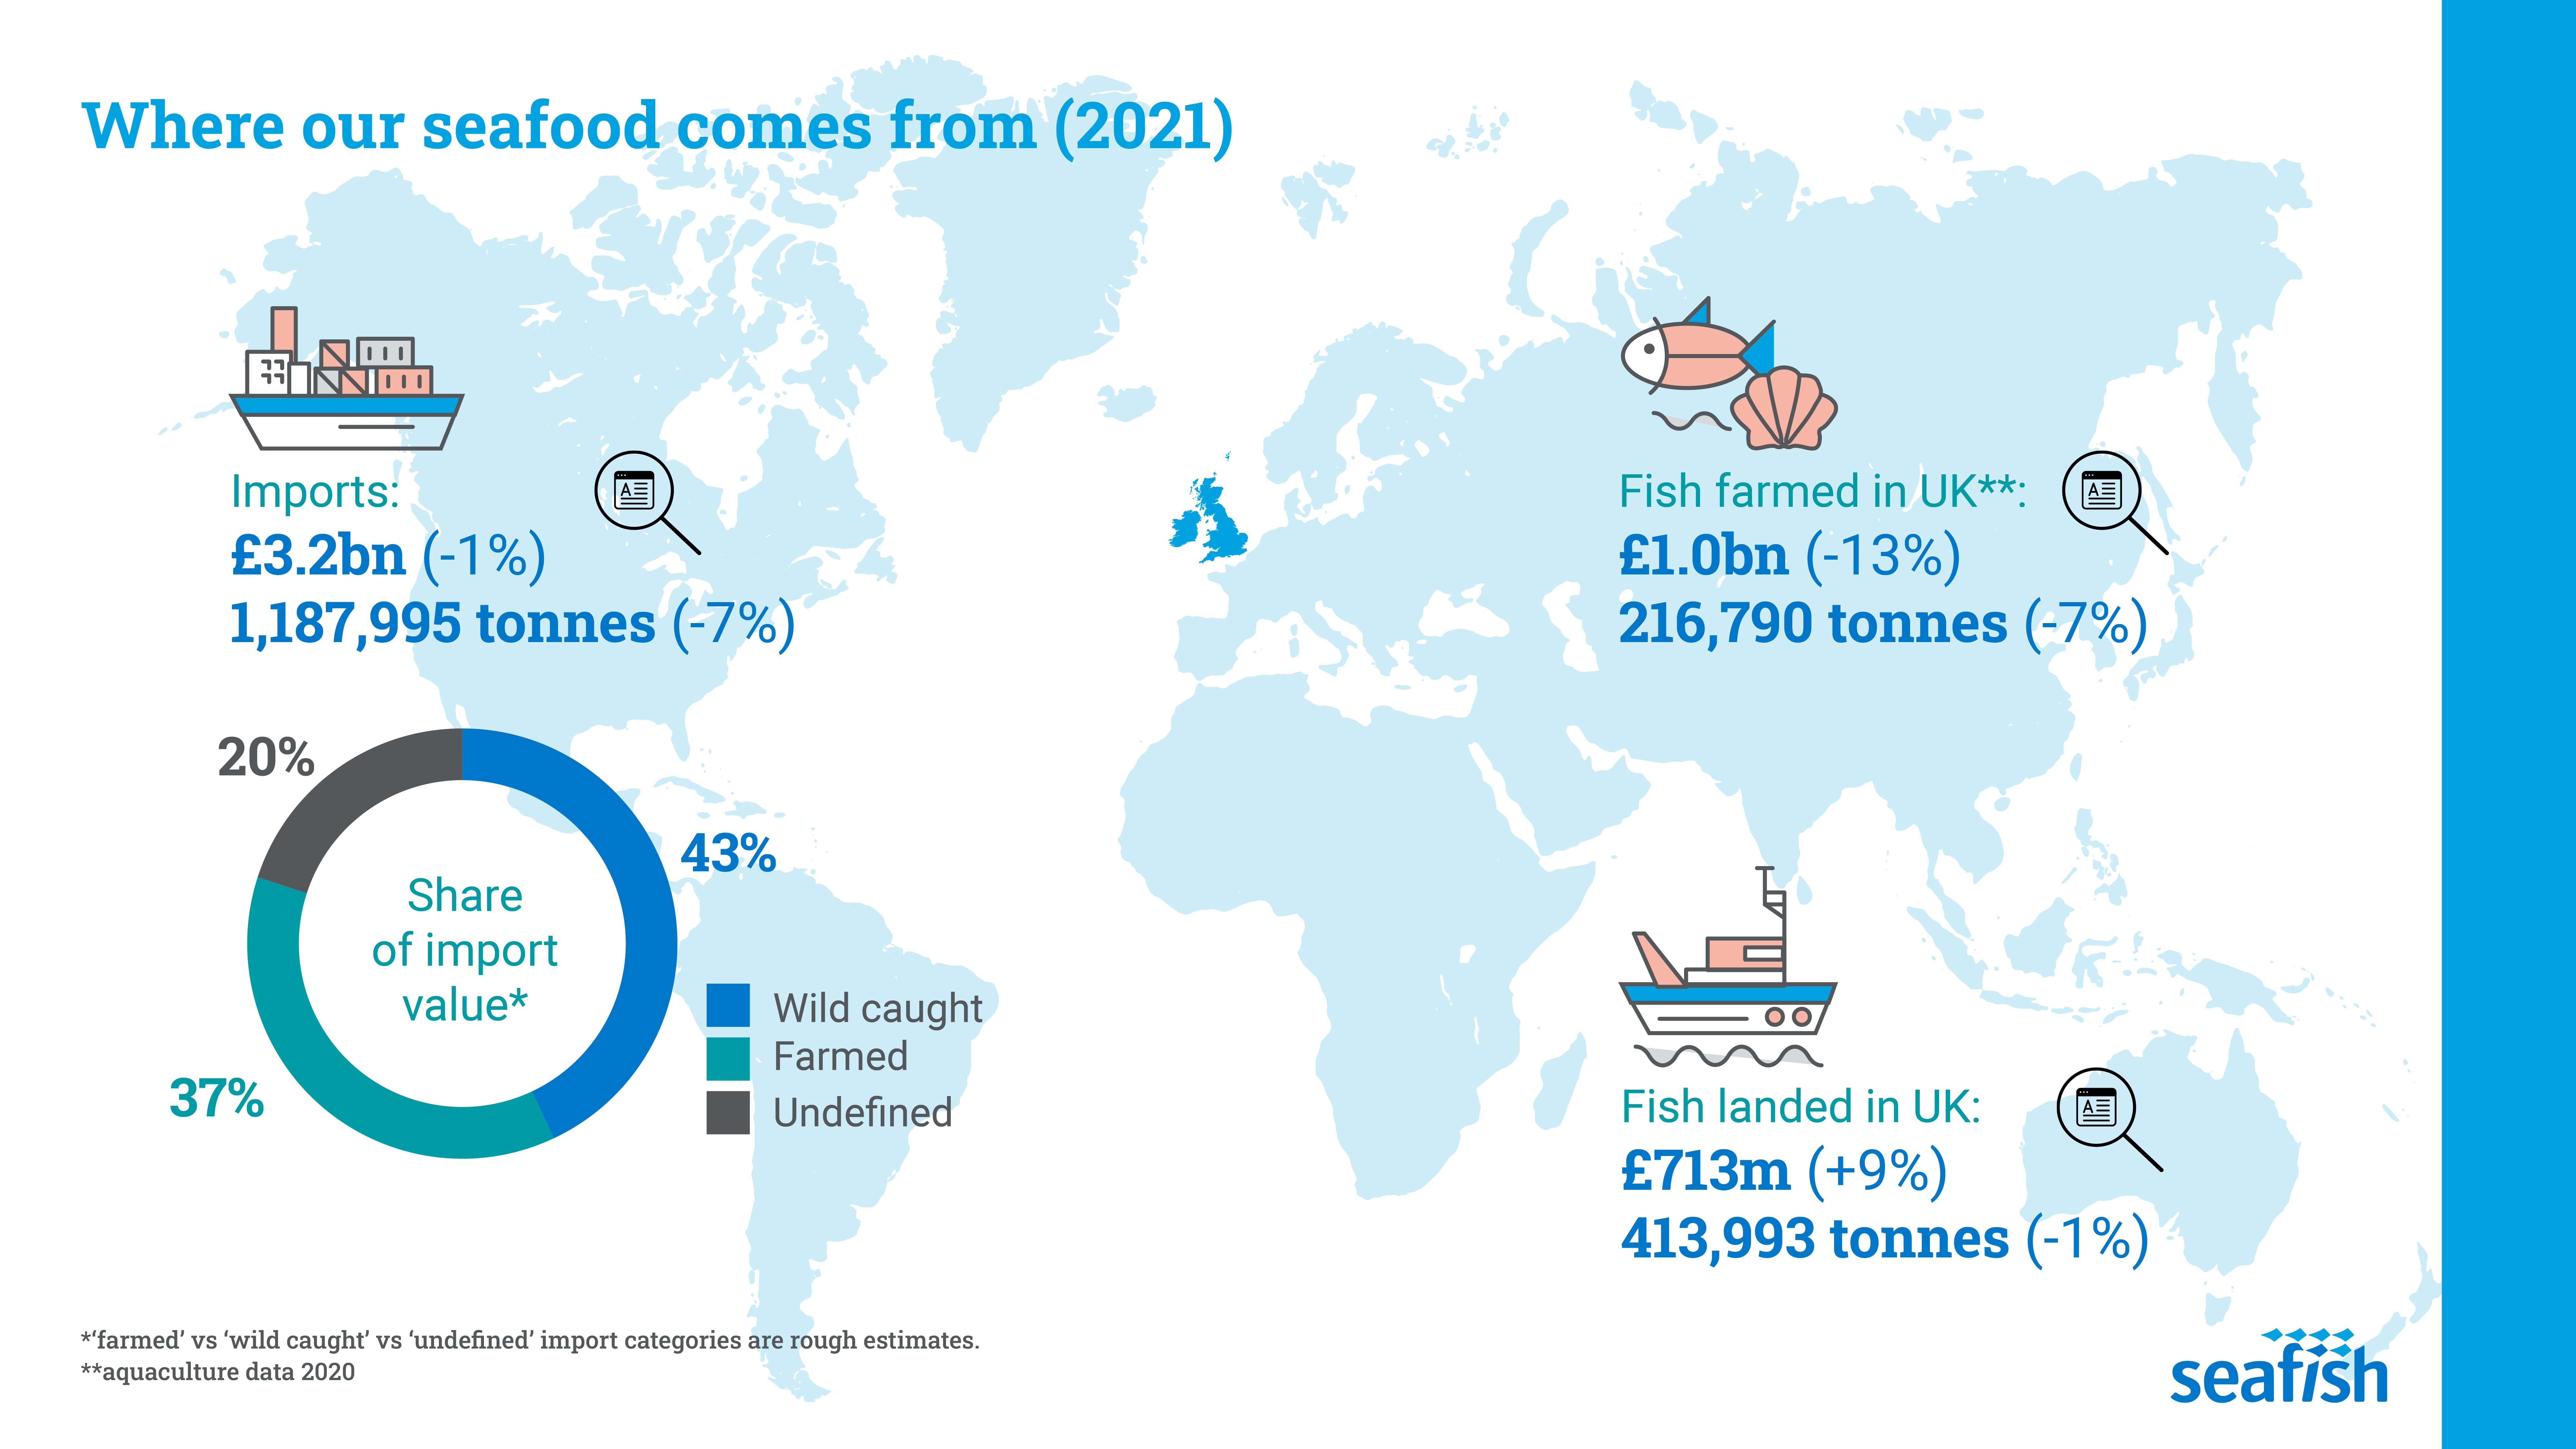 Graphic of map of the world with icons for fishing landings, imports and aquaculture in the UK.